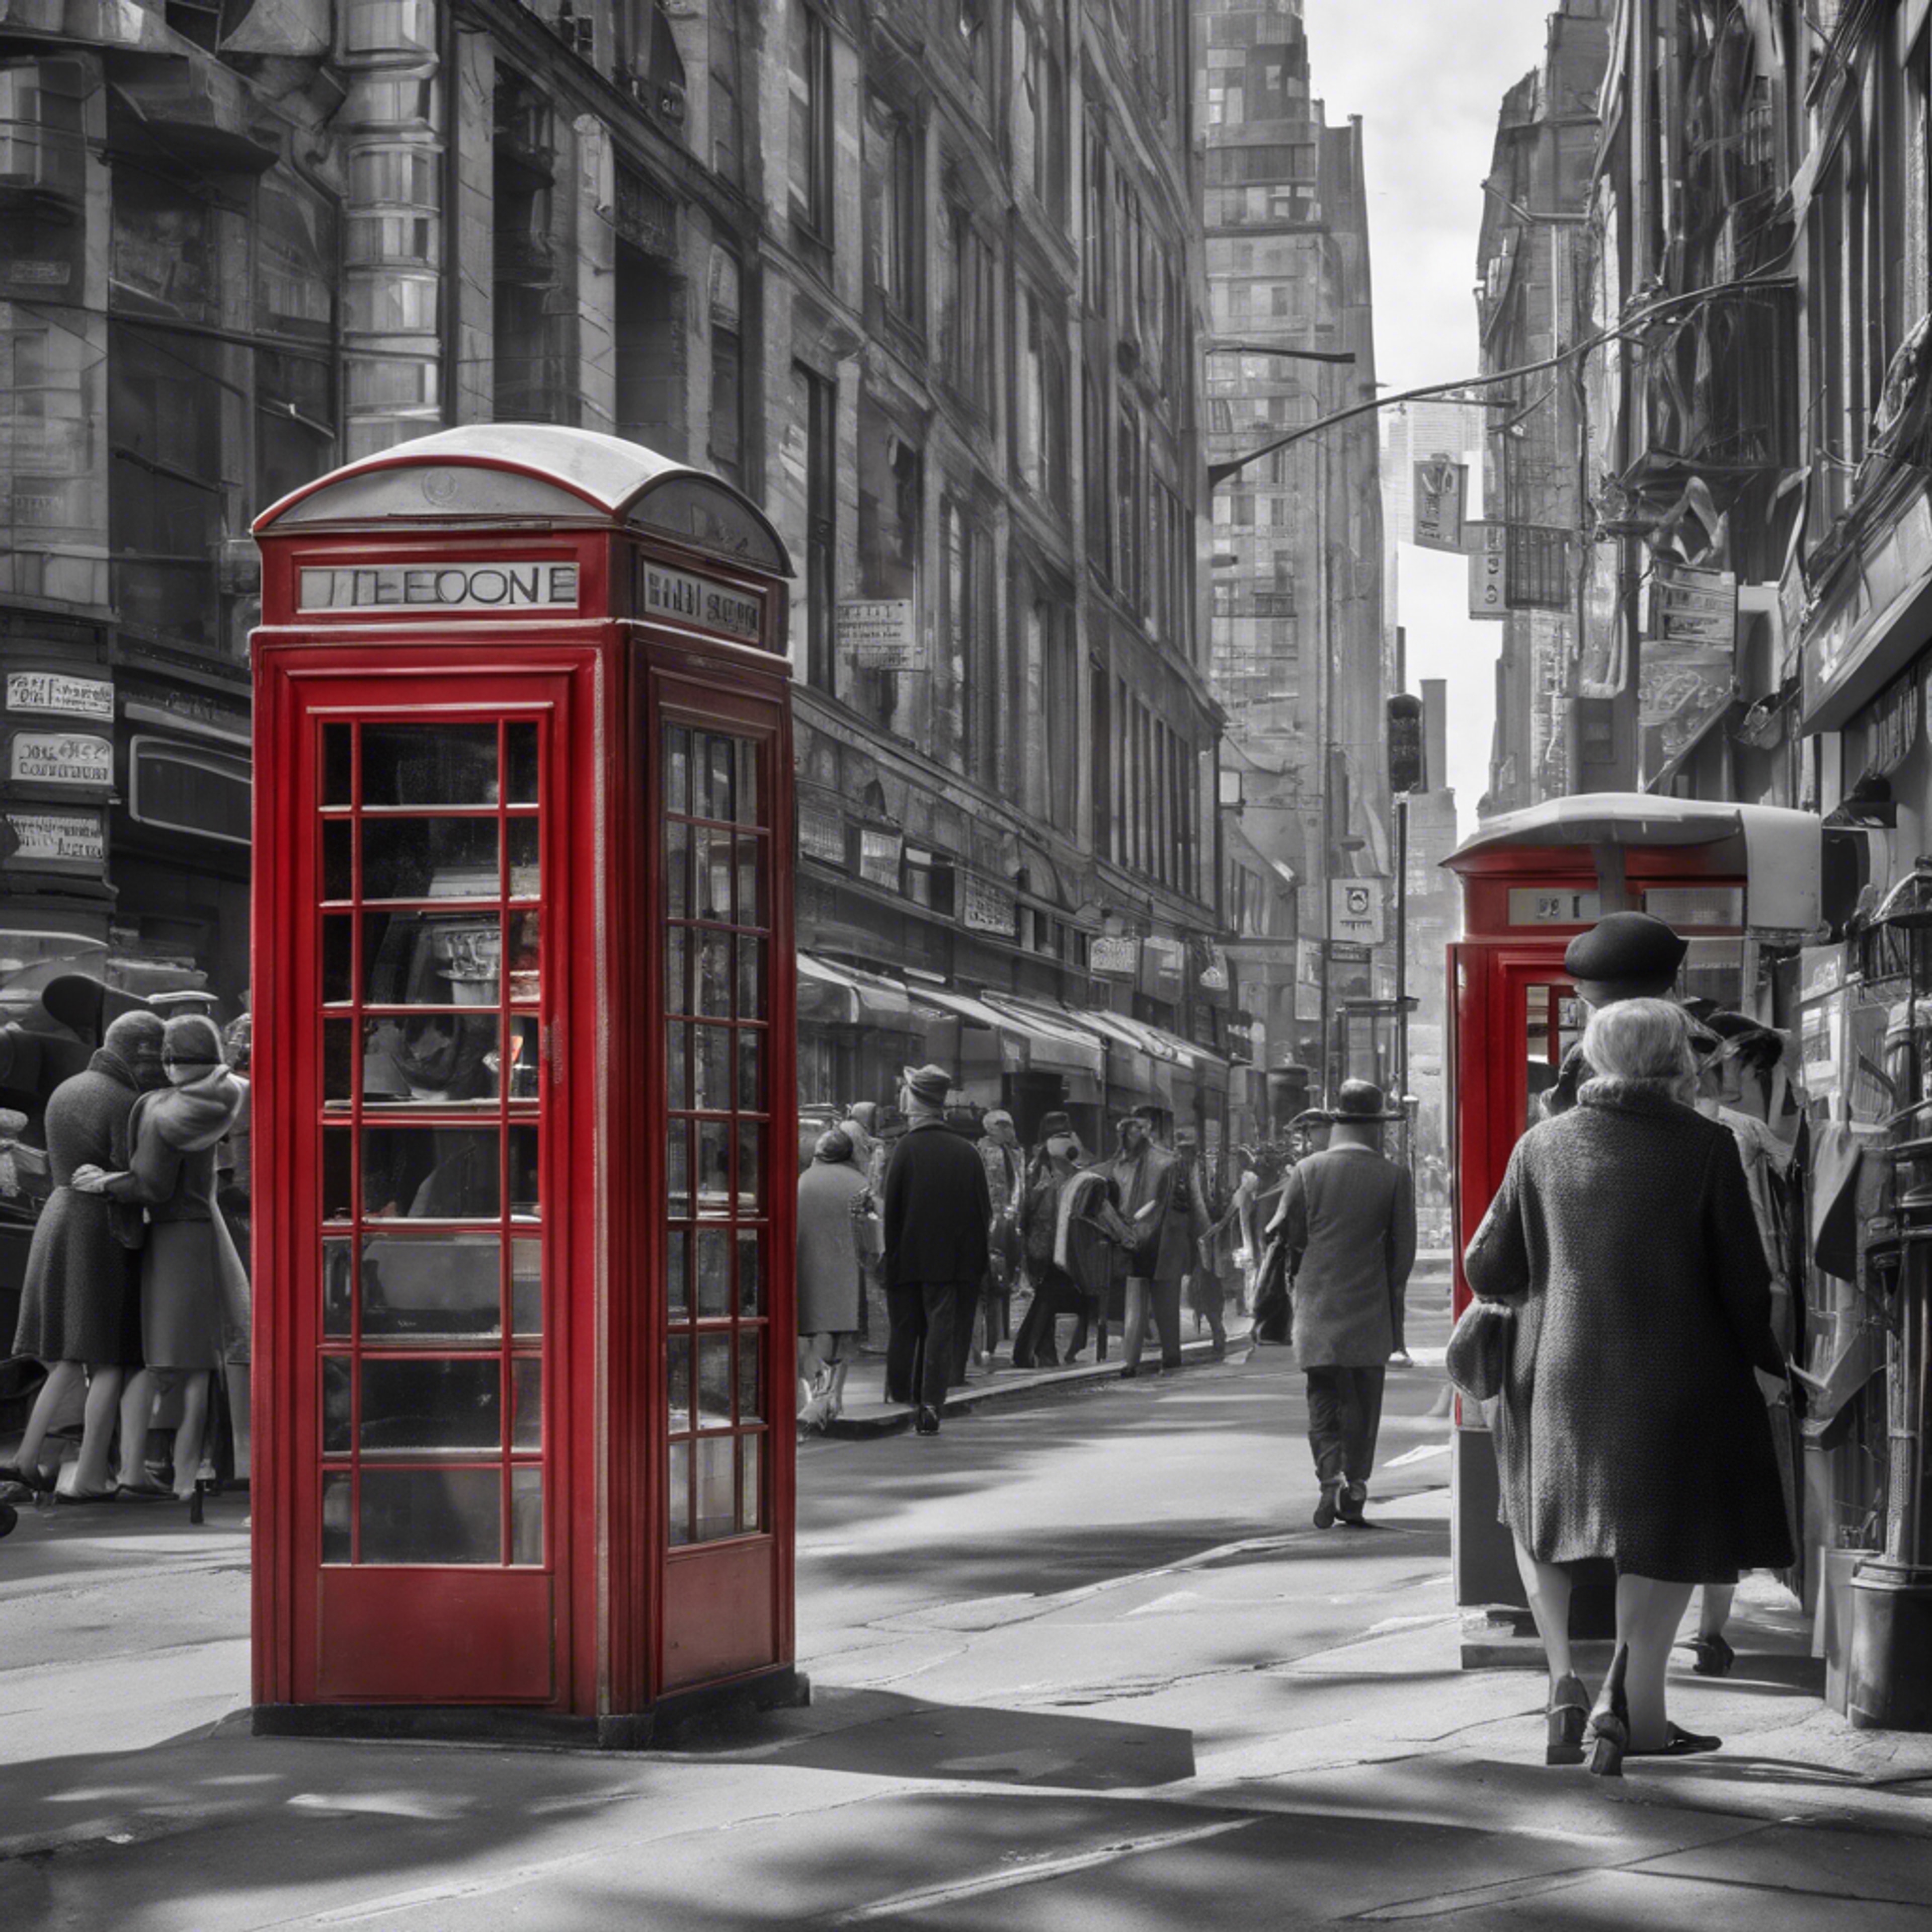 A black and white picture of a busy city street in the 1960s, with one characteristic iconic red phone booth. ផ្ទាំង​រូបភាព[8cad1b57085c4579b492]